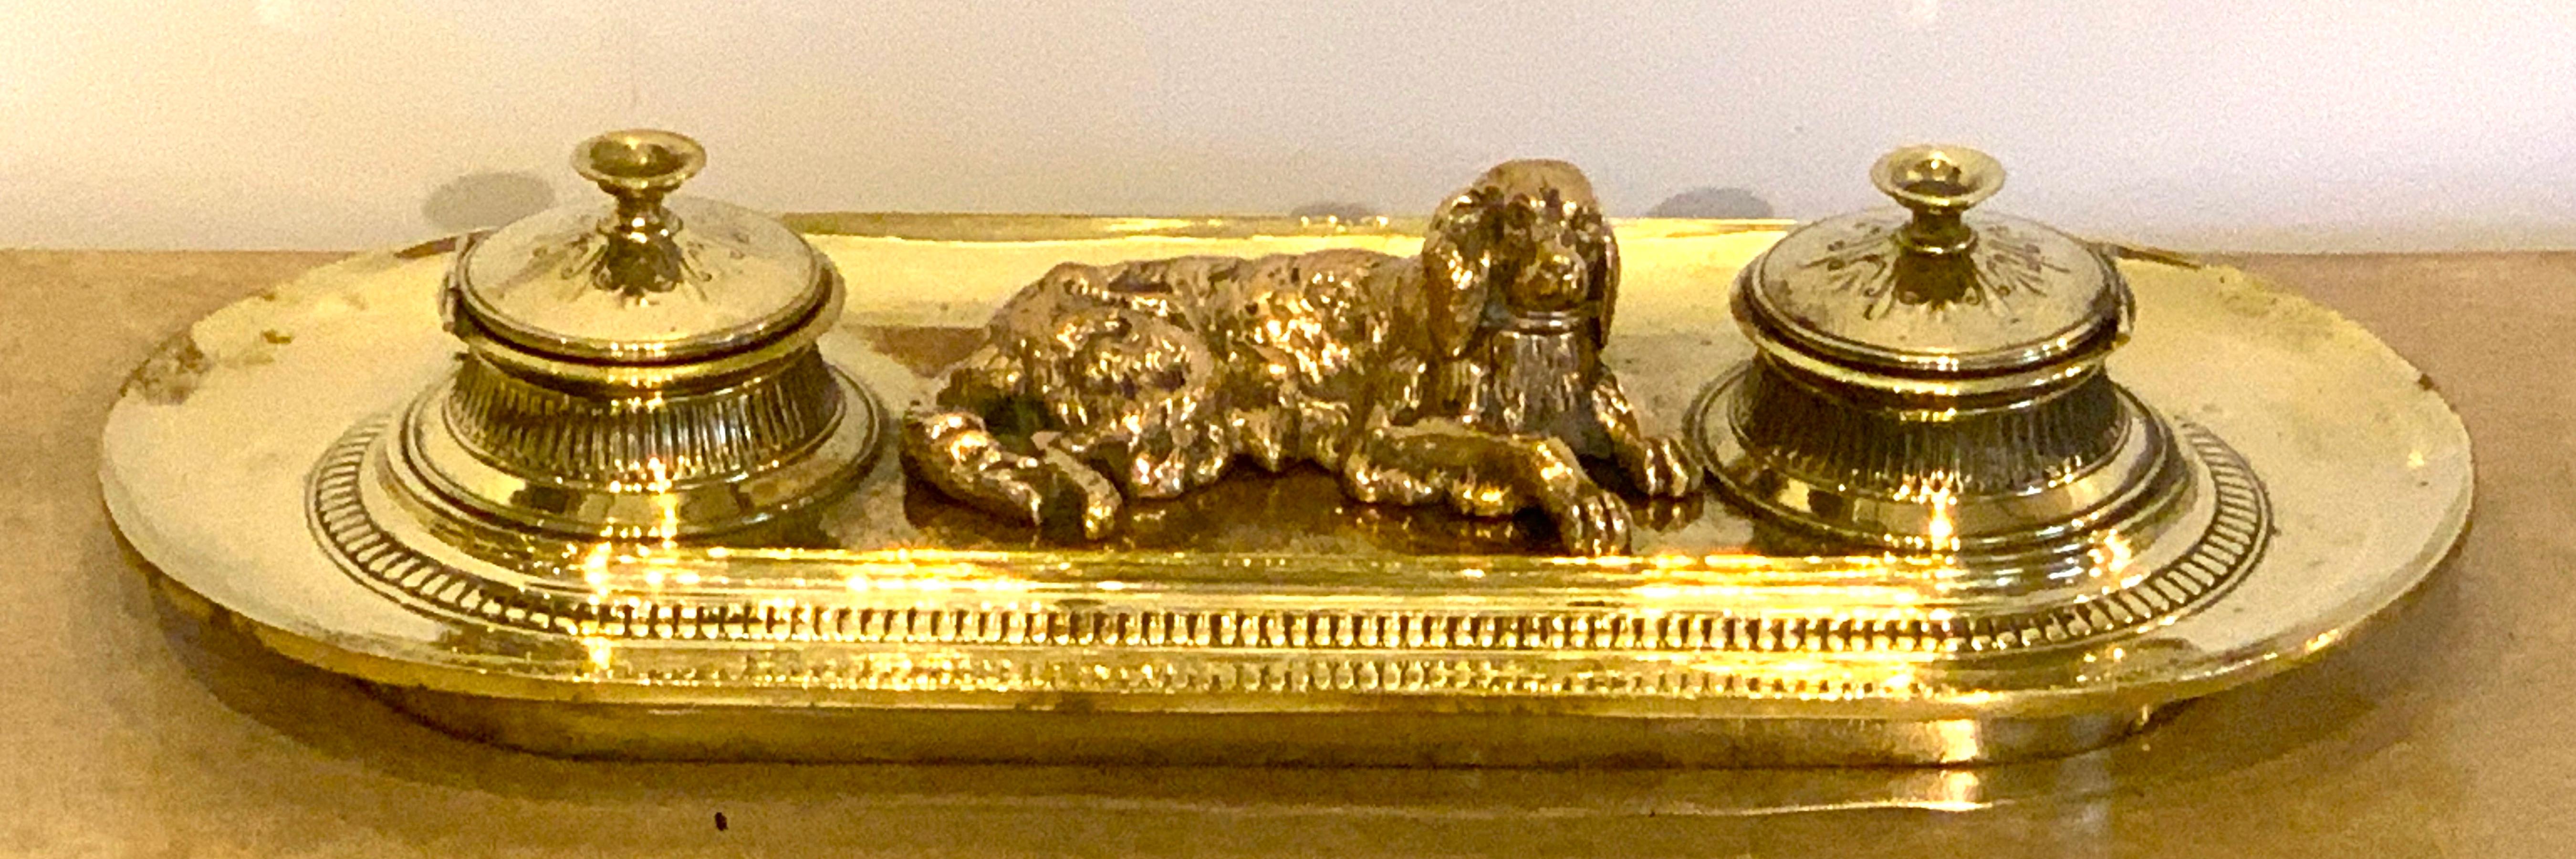 19th century English brass resting dog double inkwell, the wells opening to the left and the right.